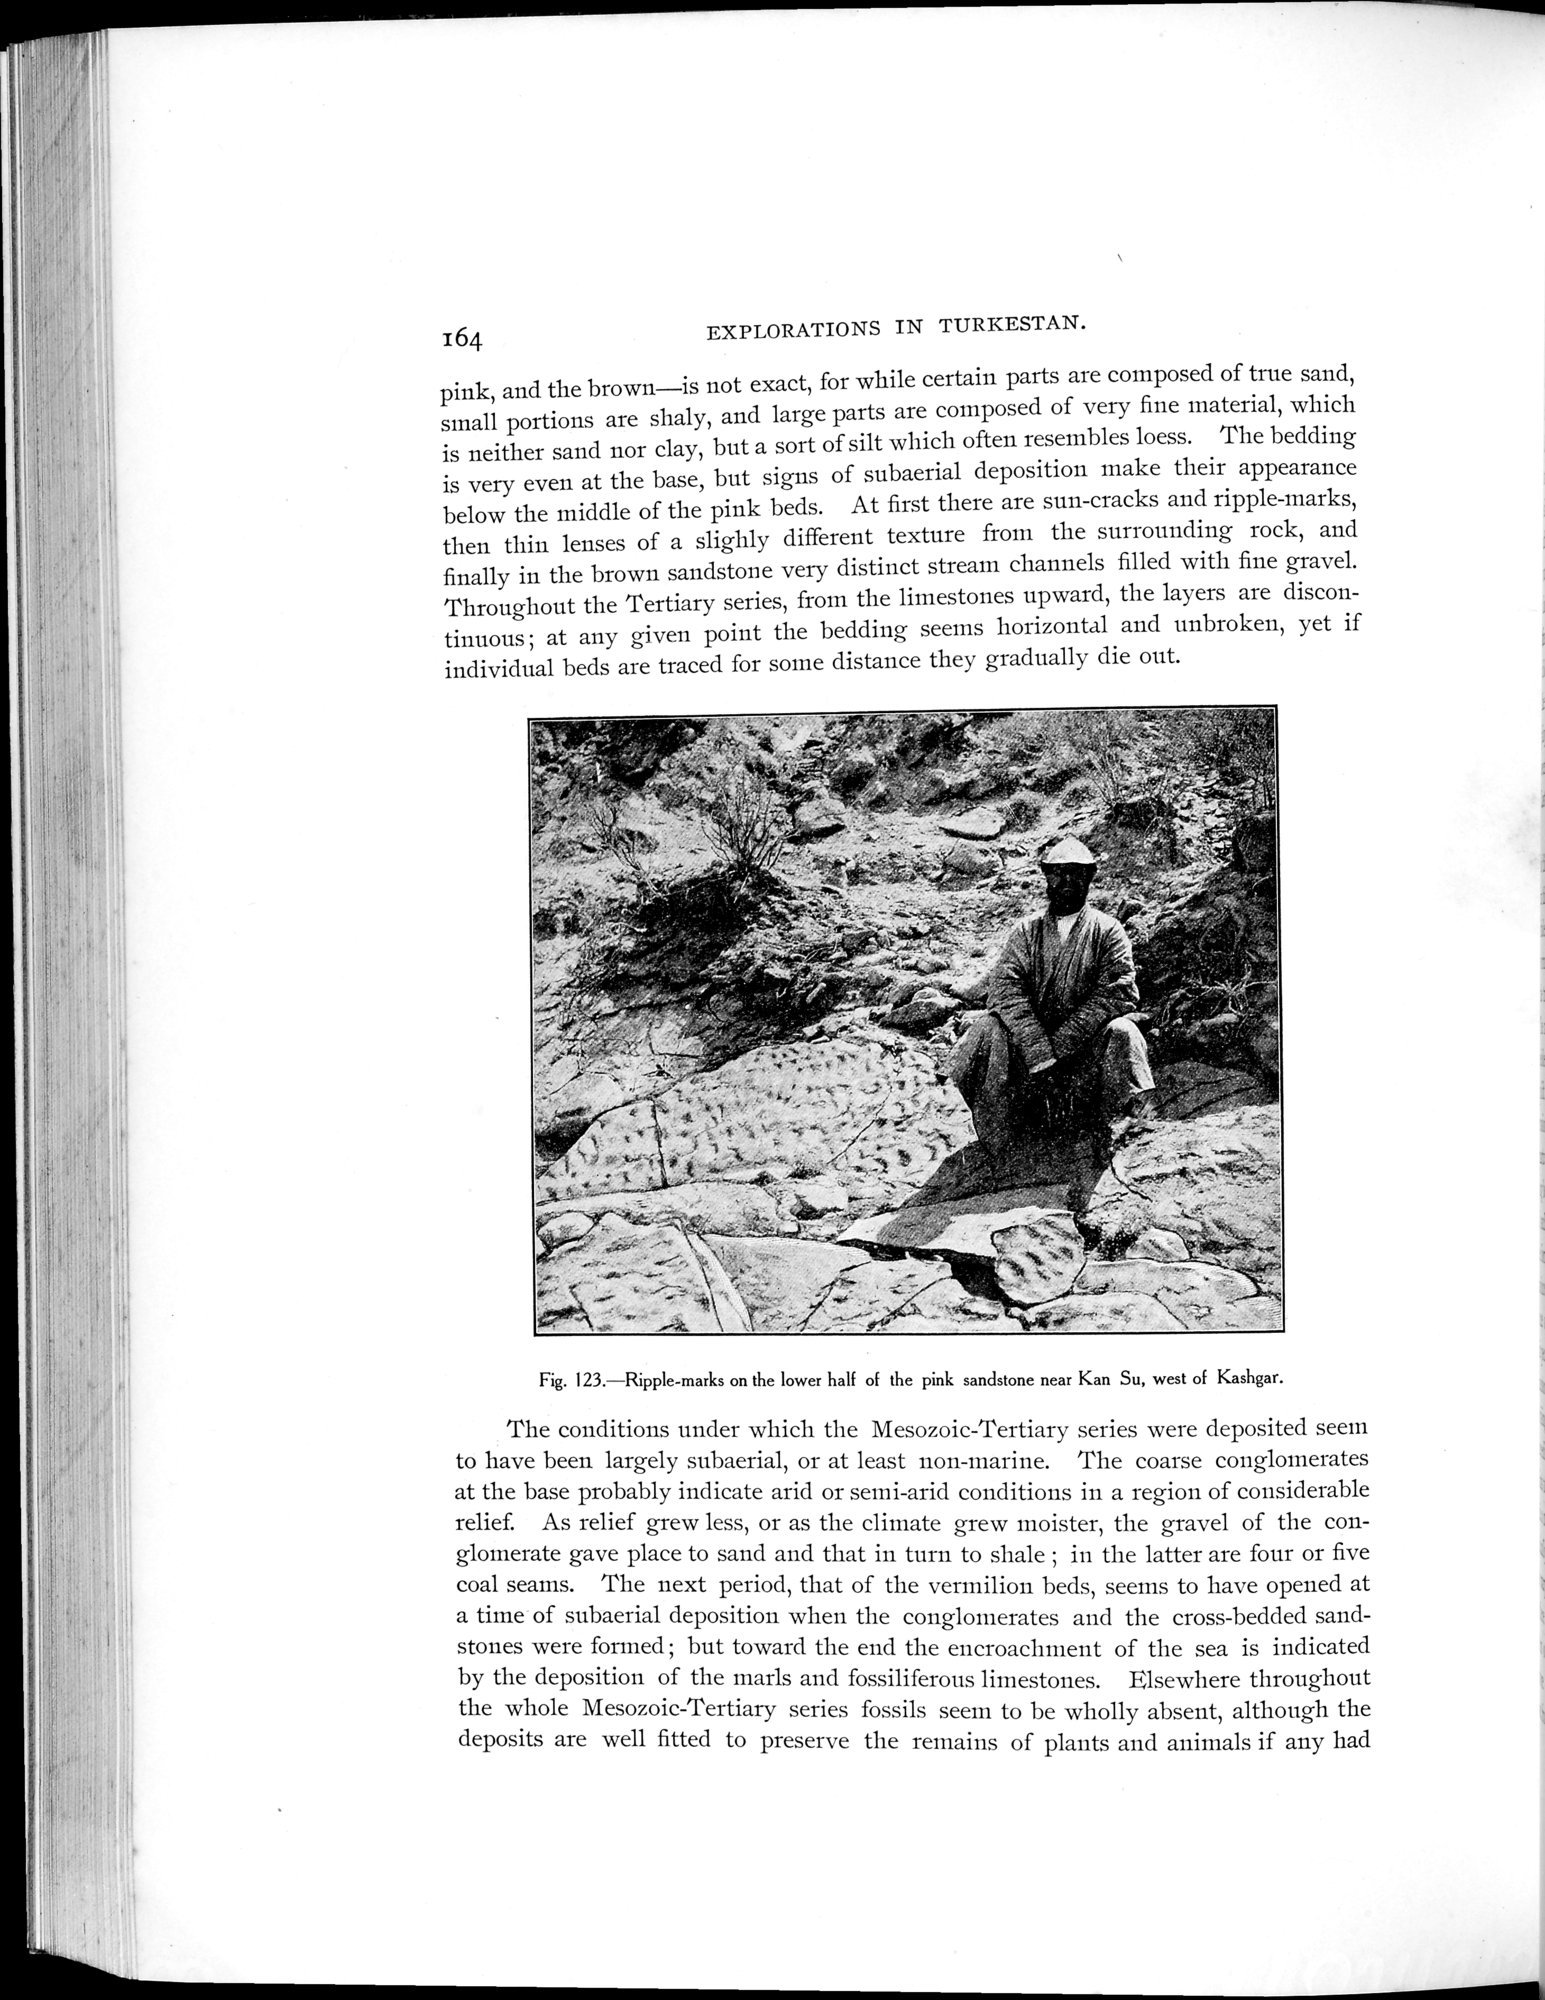 Explorations in Turkestan 1903 : vol.1 / Page 194 (Grayscale High Resolution Image)